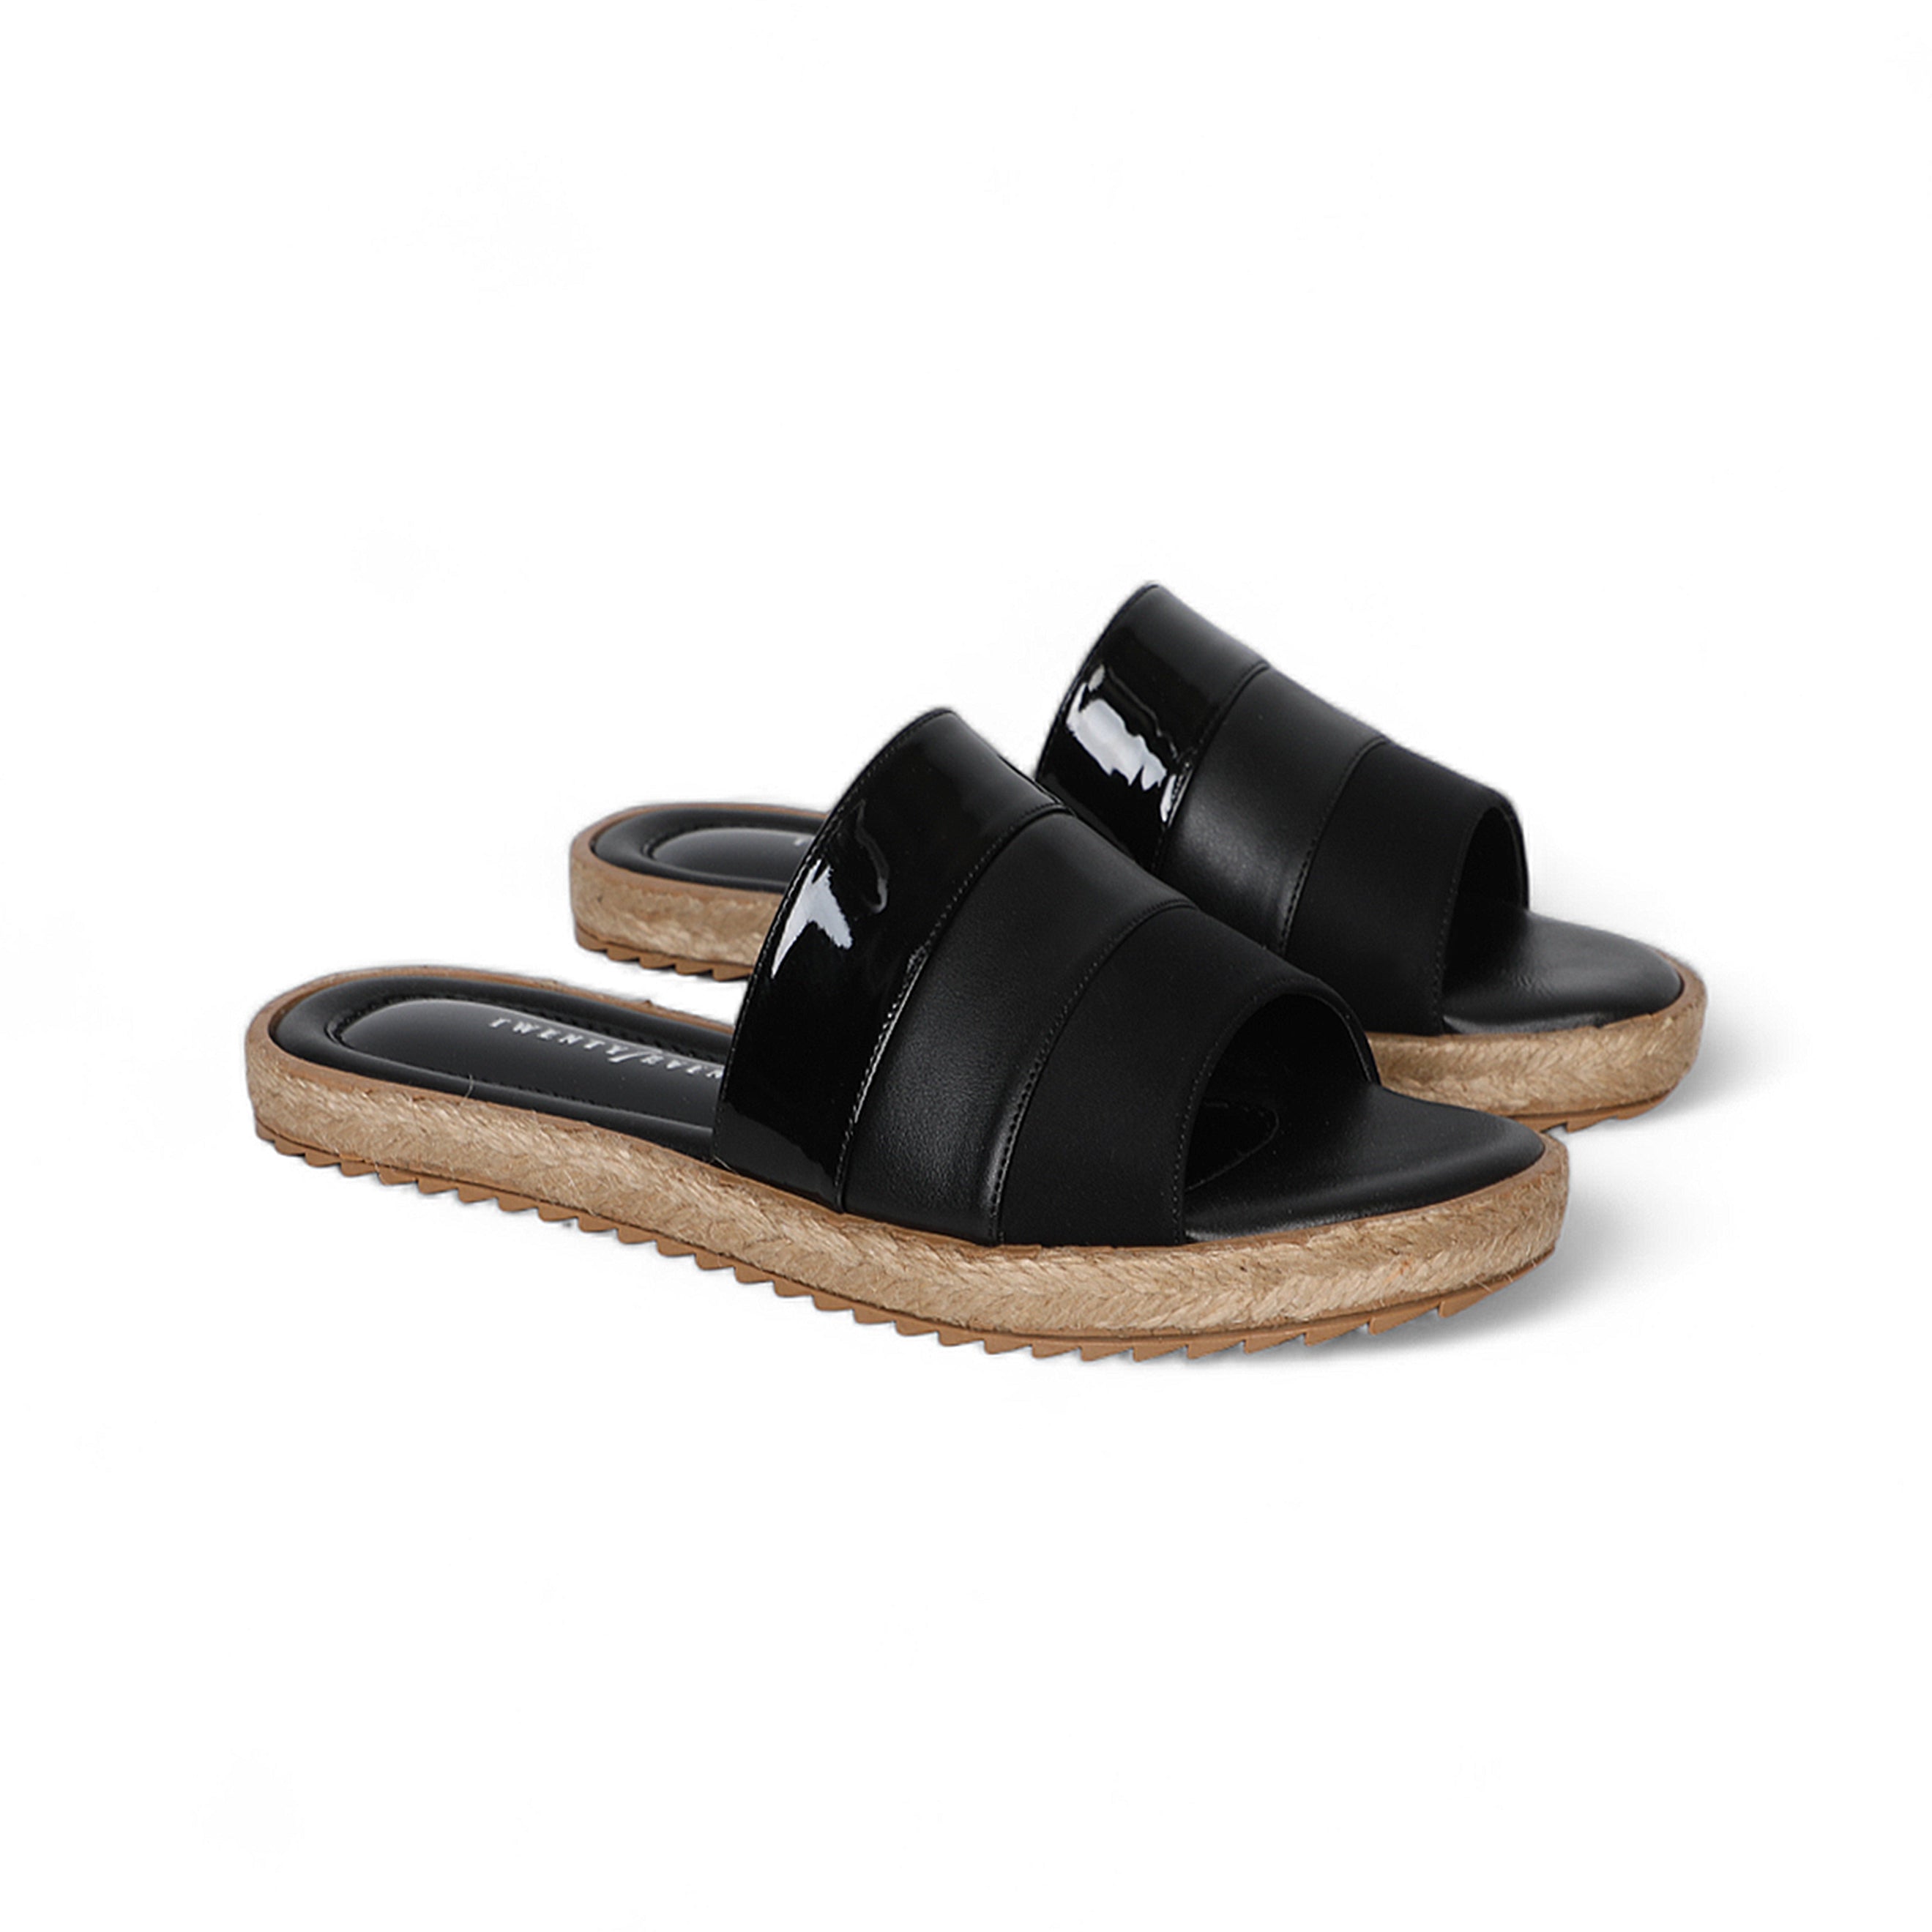 One Strap Black Slipper With Small Insole